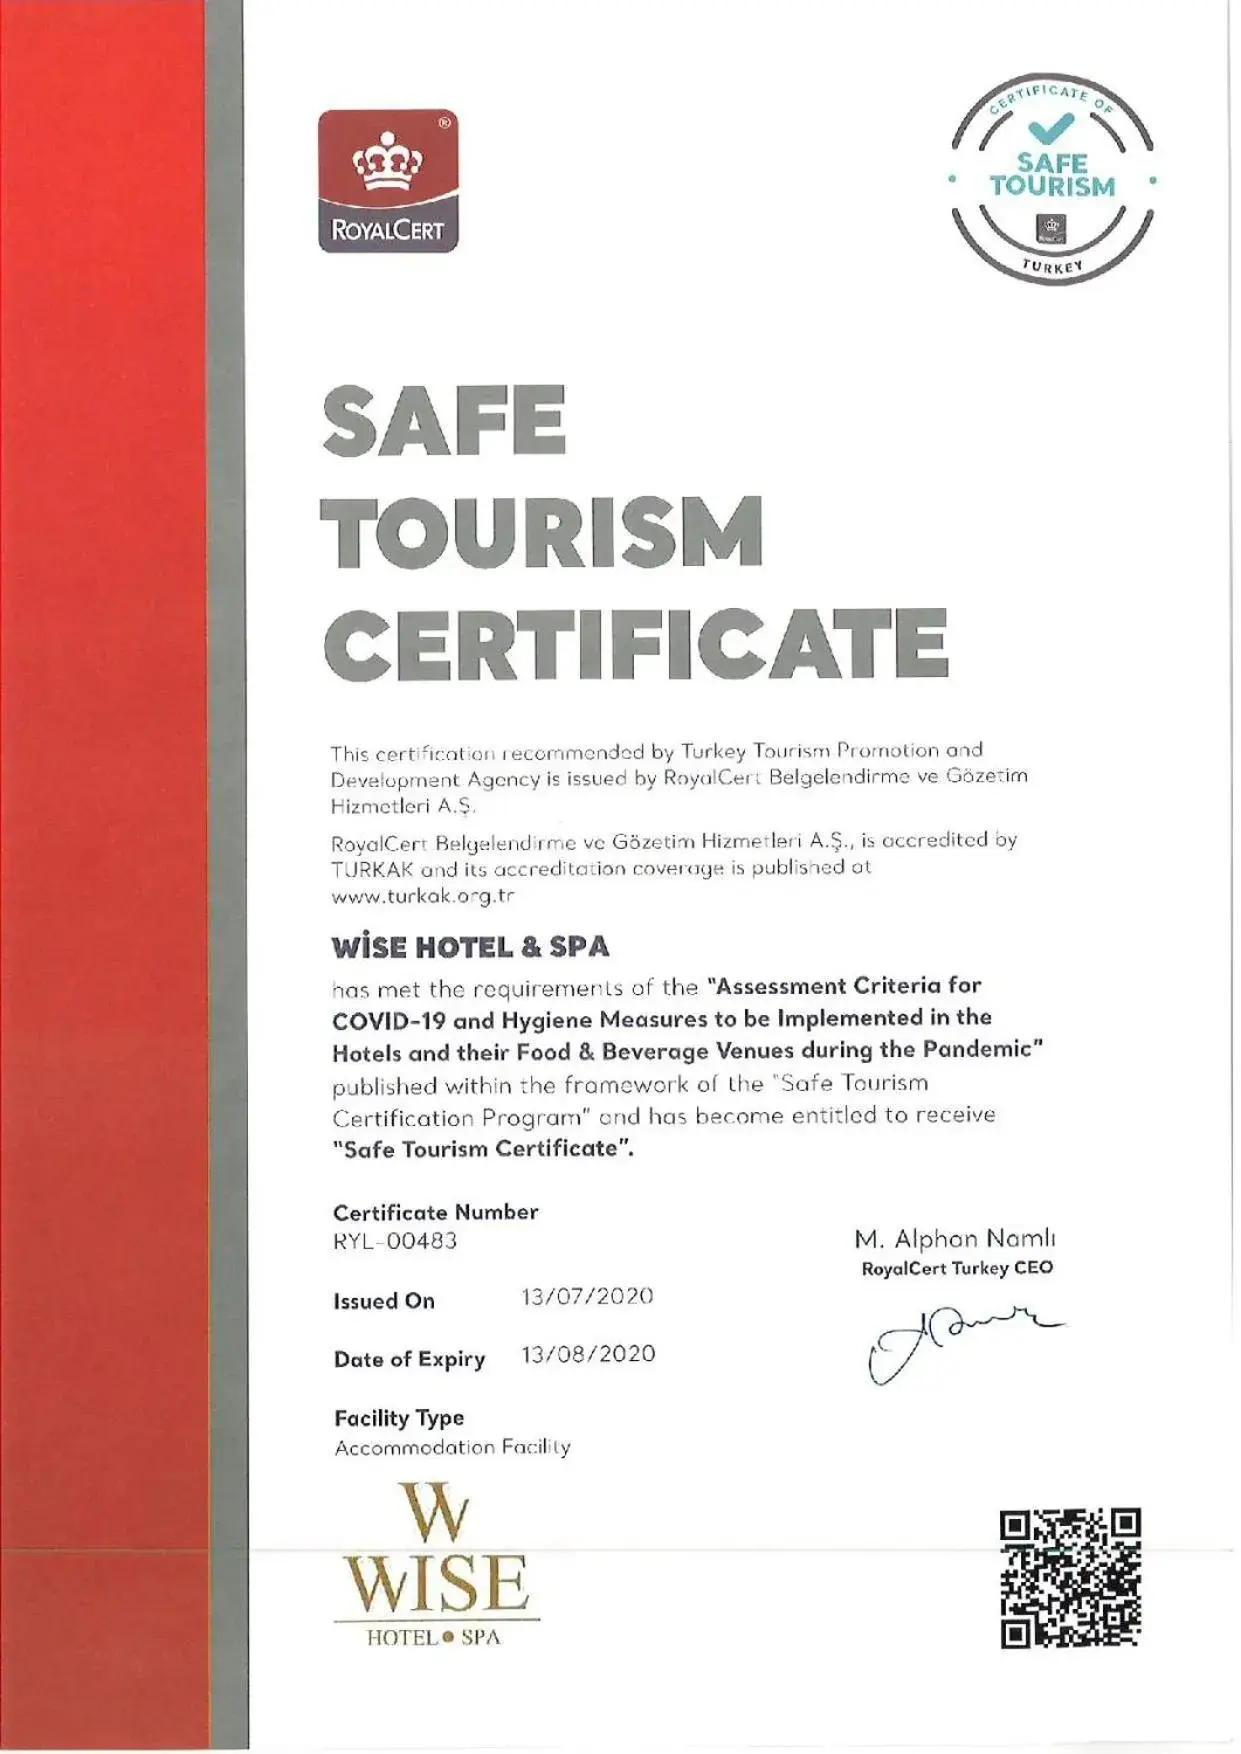 Certificate/Award in Wise Hotel & Spa - Adults Only